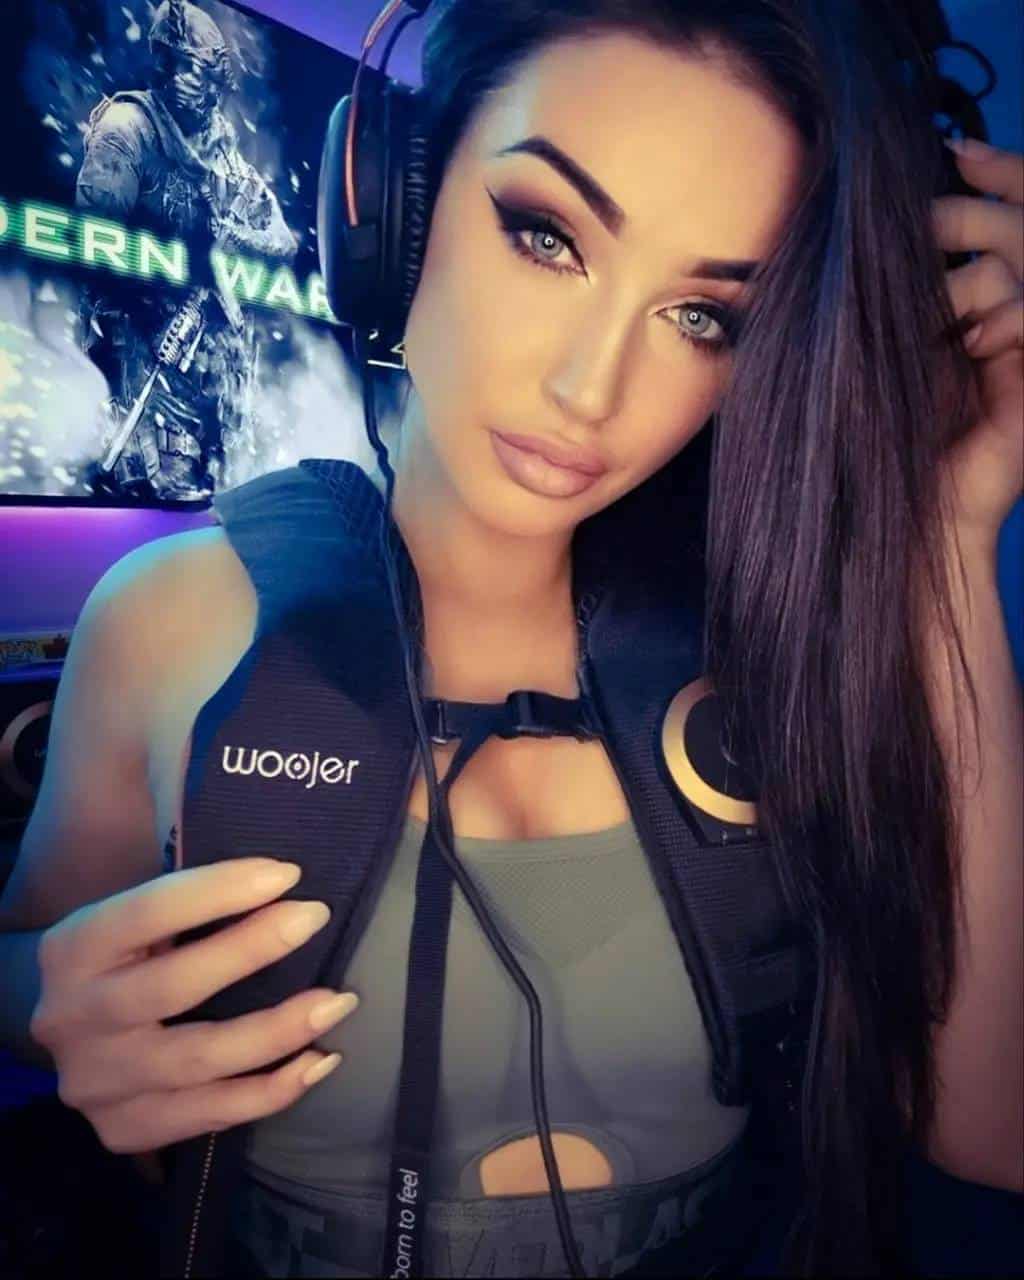 Late night Gaming with WOOJER
Things are about to get intense!
CALL OF DUTY
.
. 1